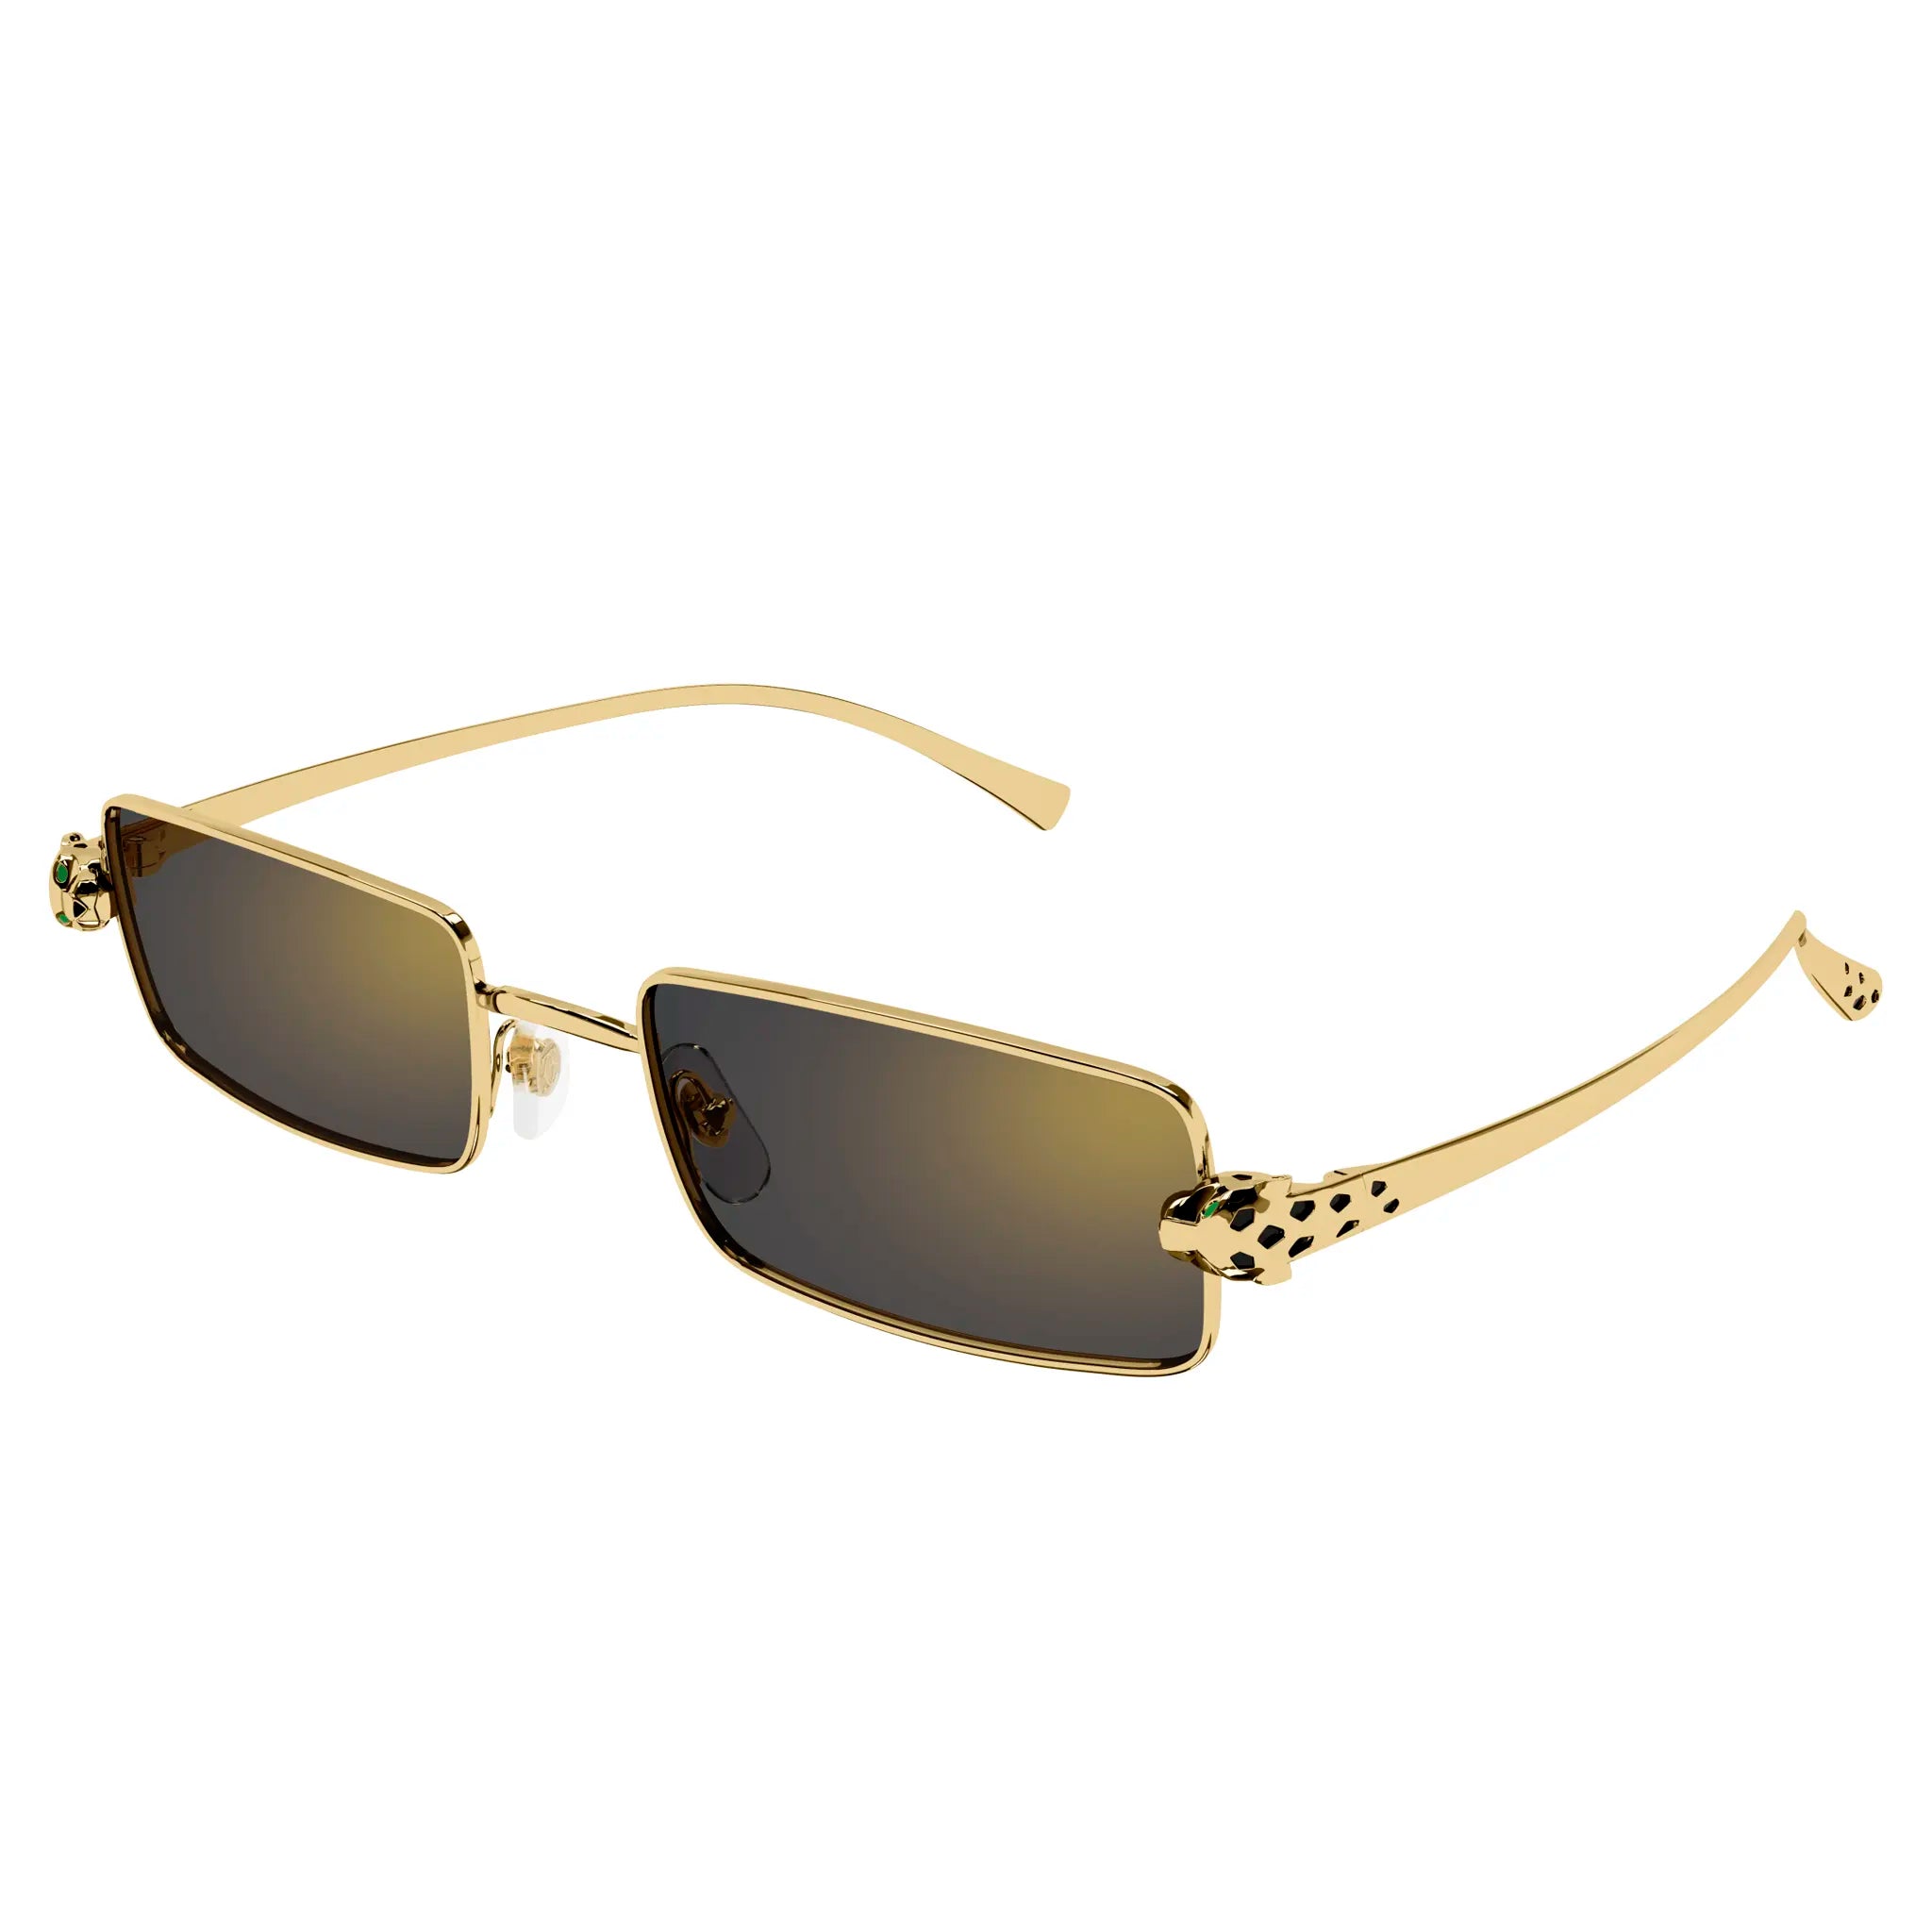 Front Side view of Cartier Eyewear CT0473S-001 Panthere De Cartier Gold Grey Sunglasses